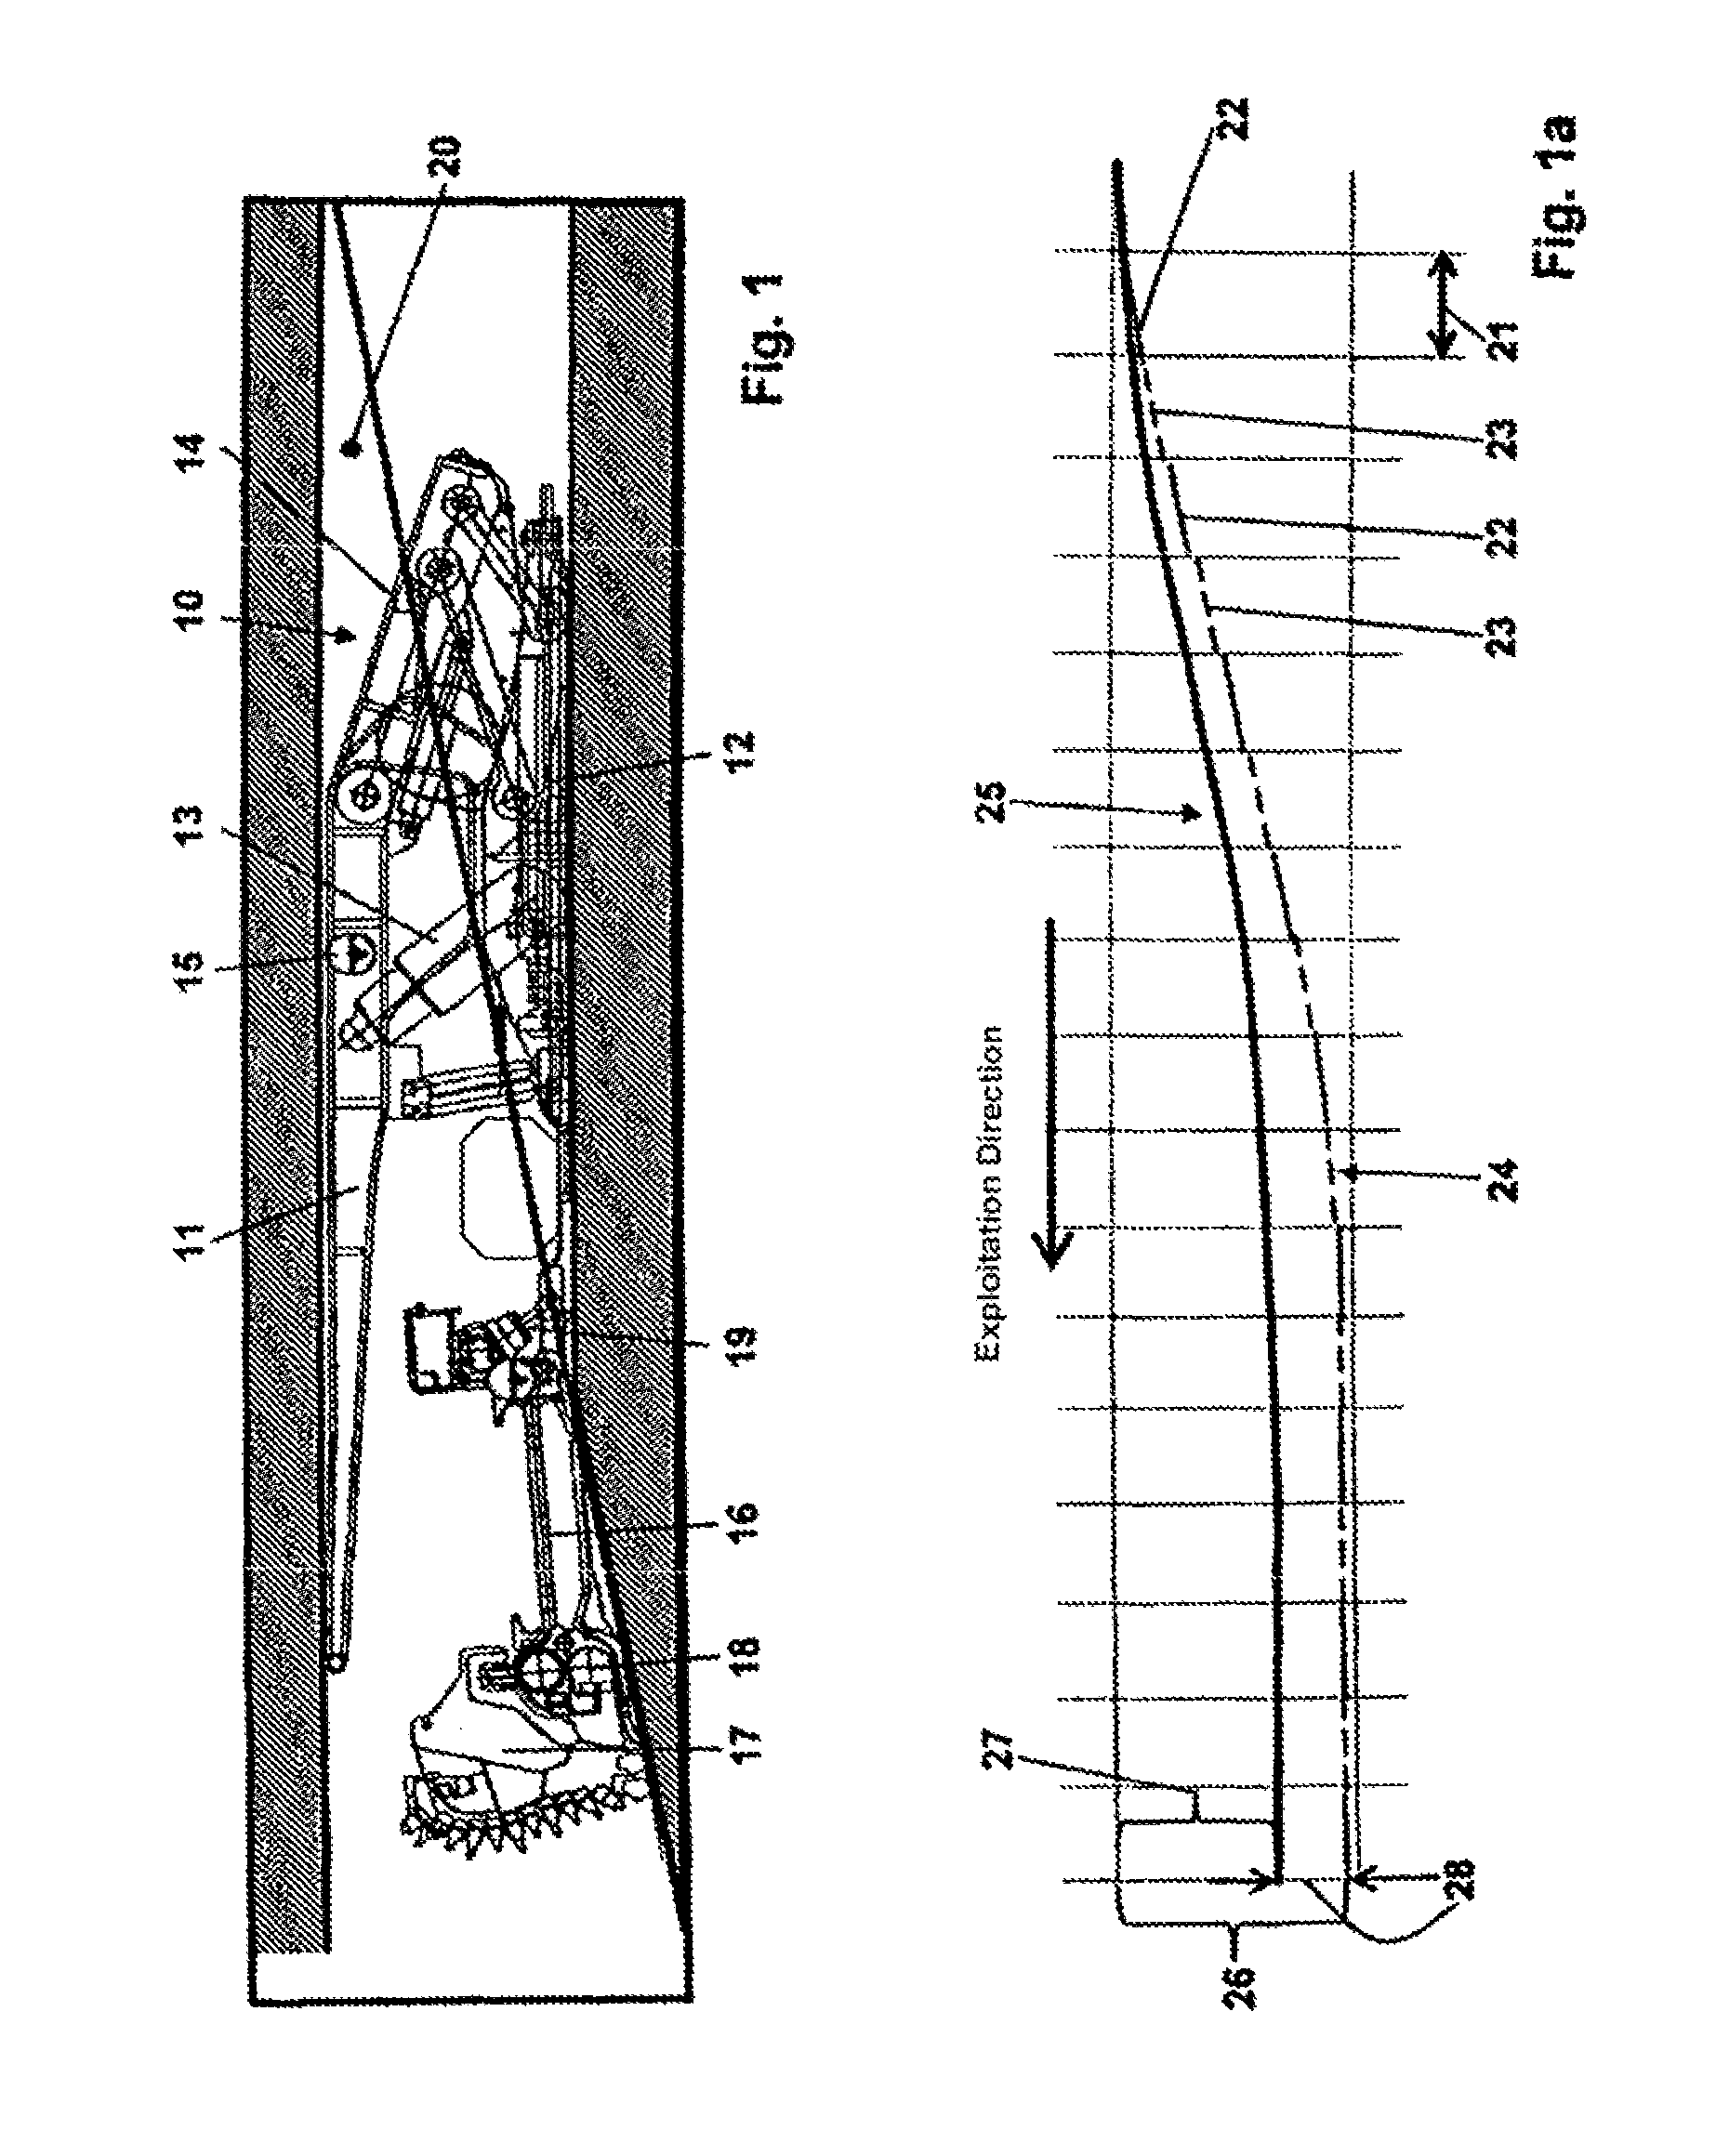 Method of setting an automatic level control of the plow in plowing operations of coal mining